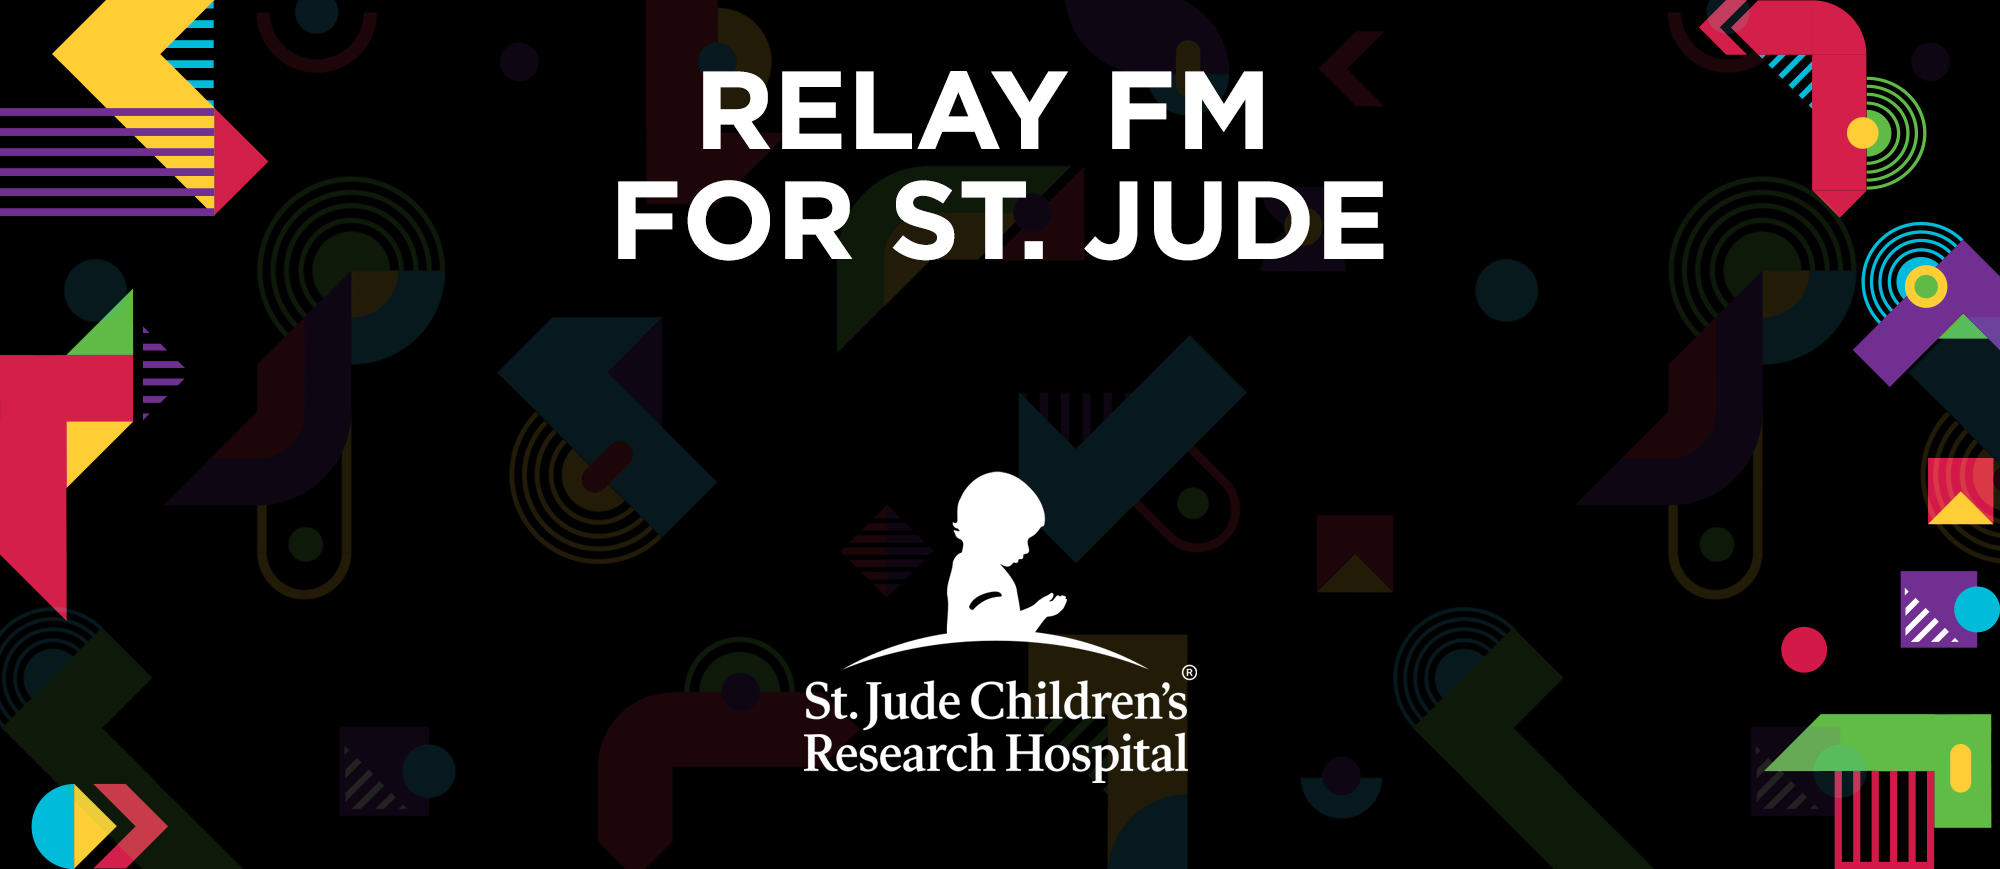 Relay FM for St. Jude campaign artwork